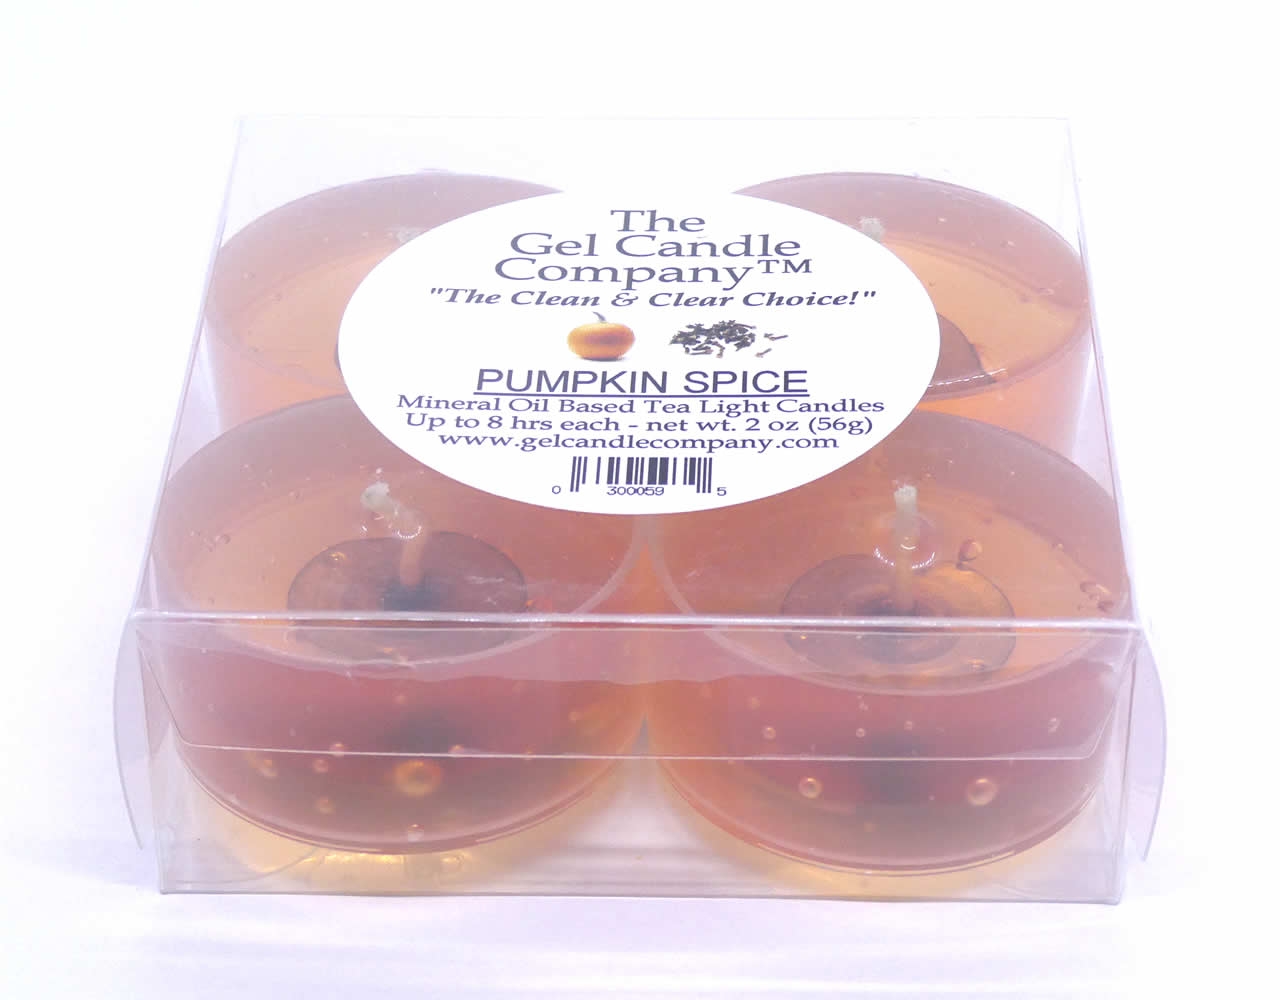 Pumpkin Spice Scented Gel Candle Tea Lights - 4 pk. - Click Image to Close